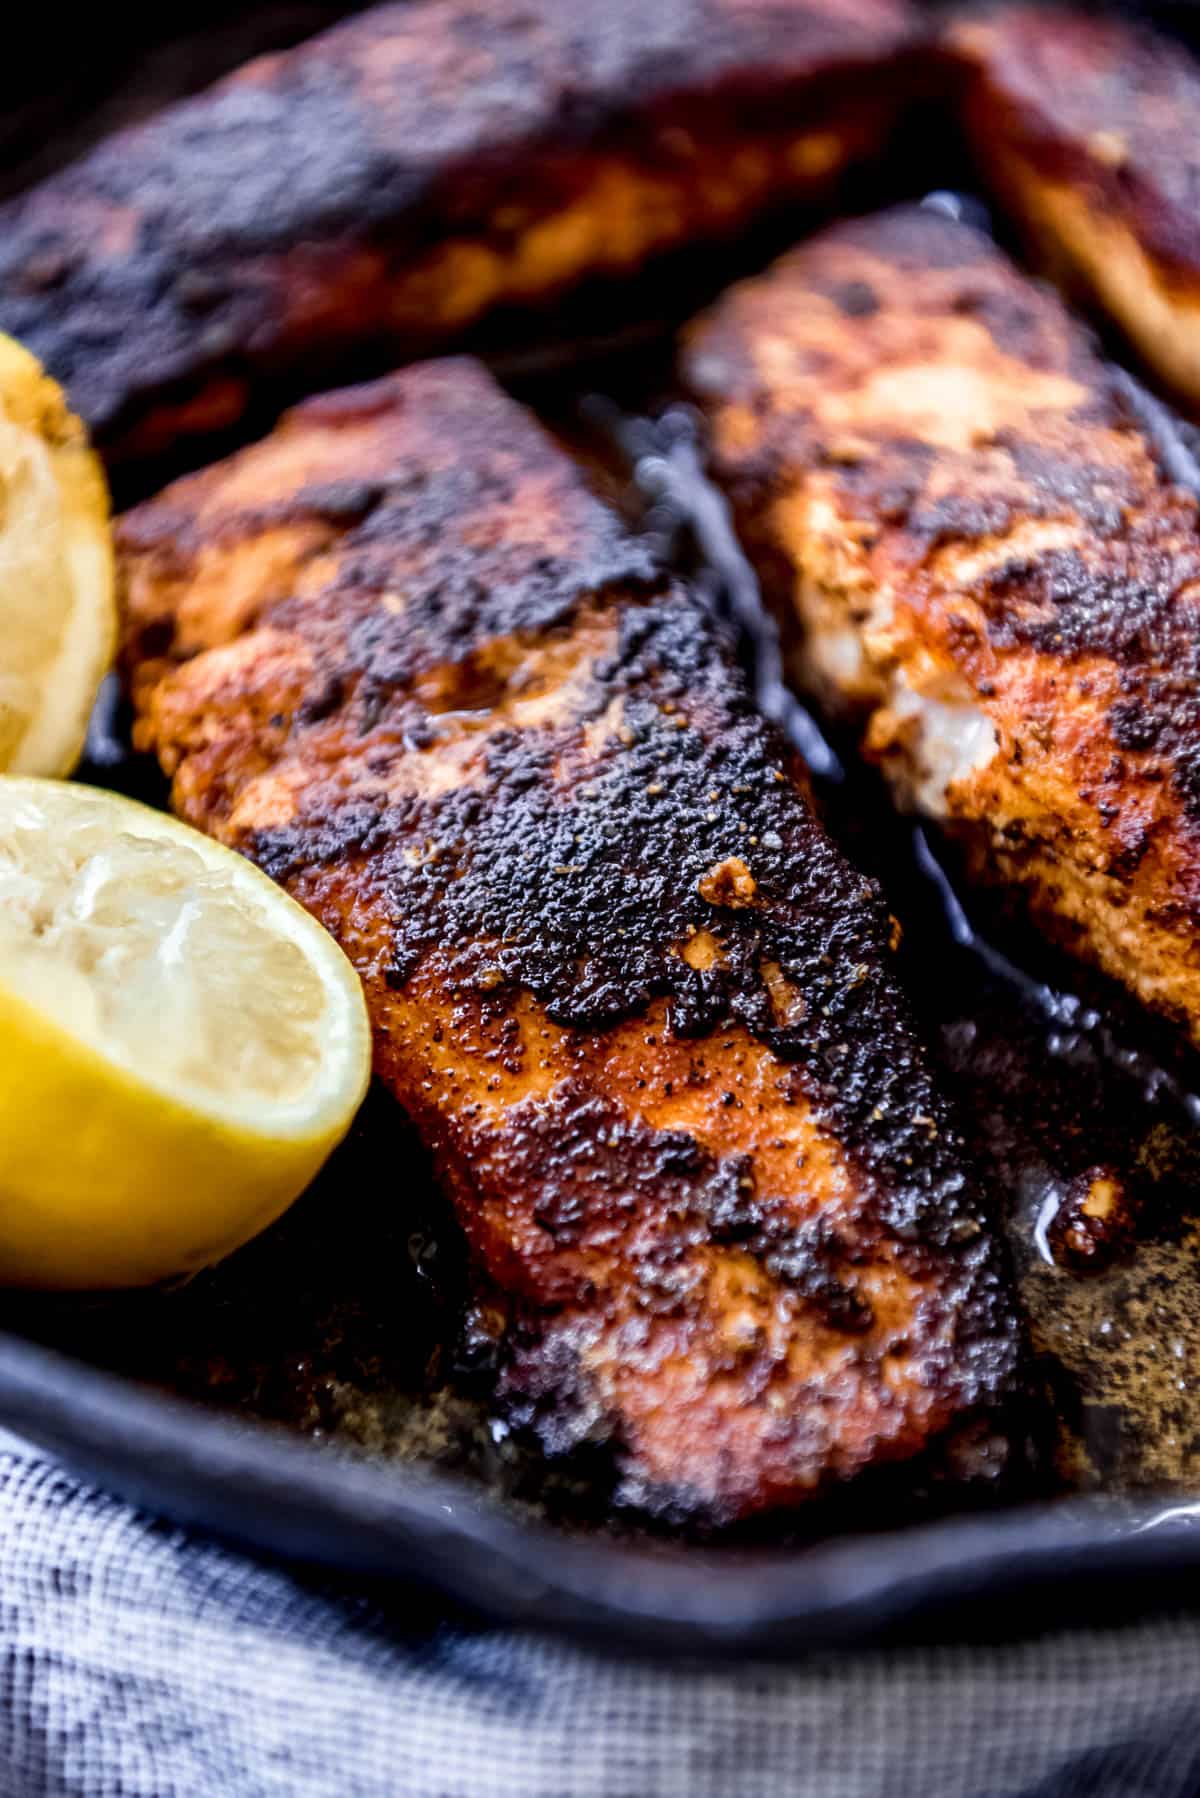 a close image of salmon fillets in a cast iron pan with a blackened crust